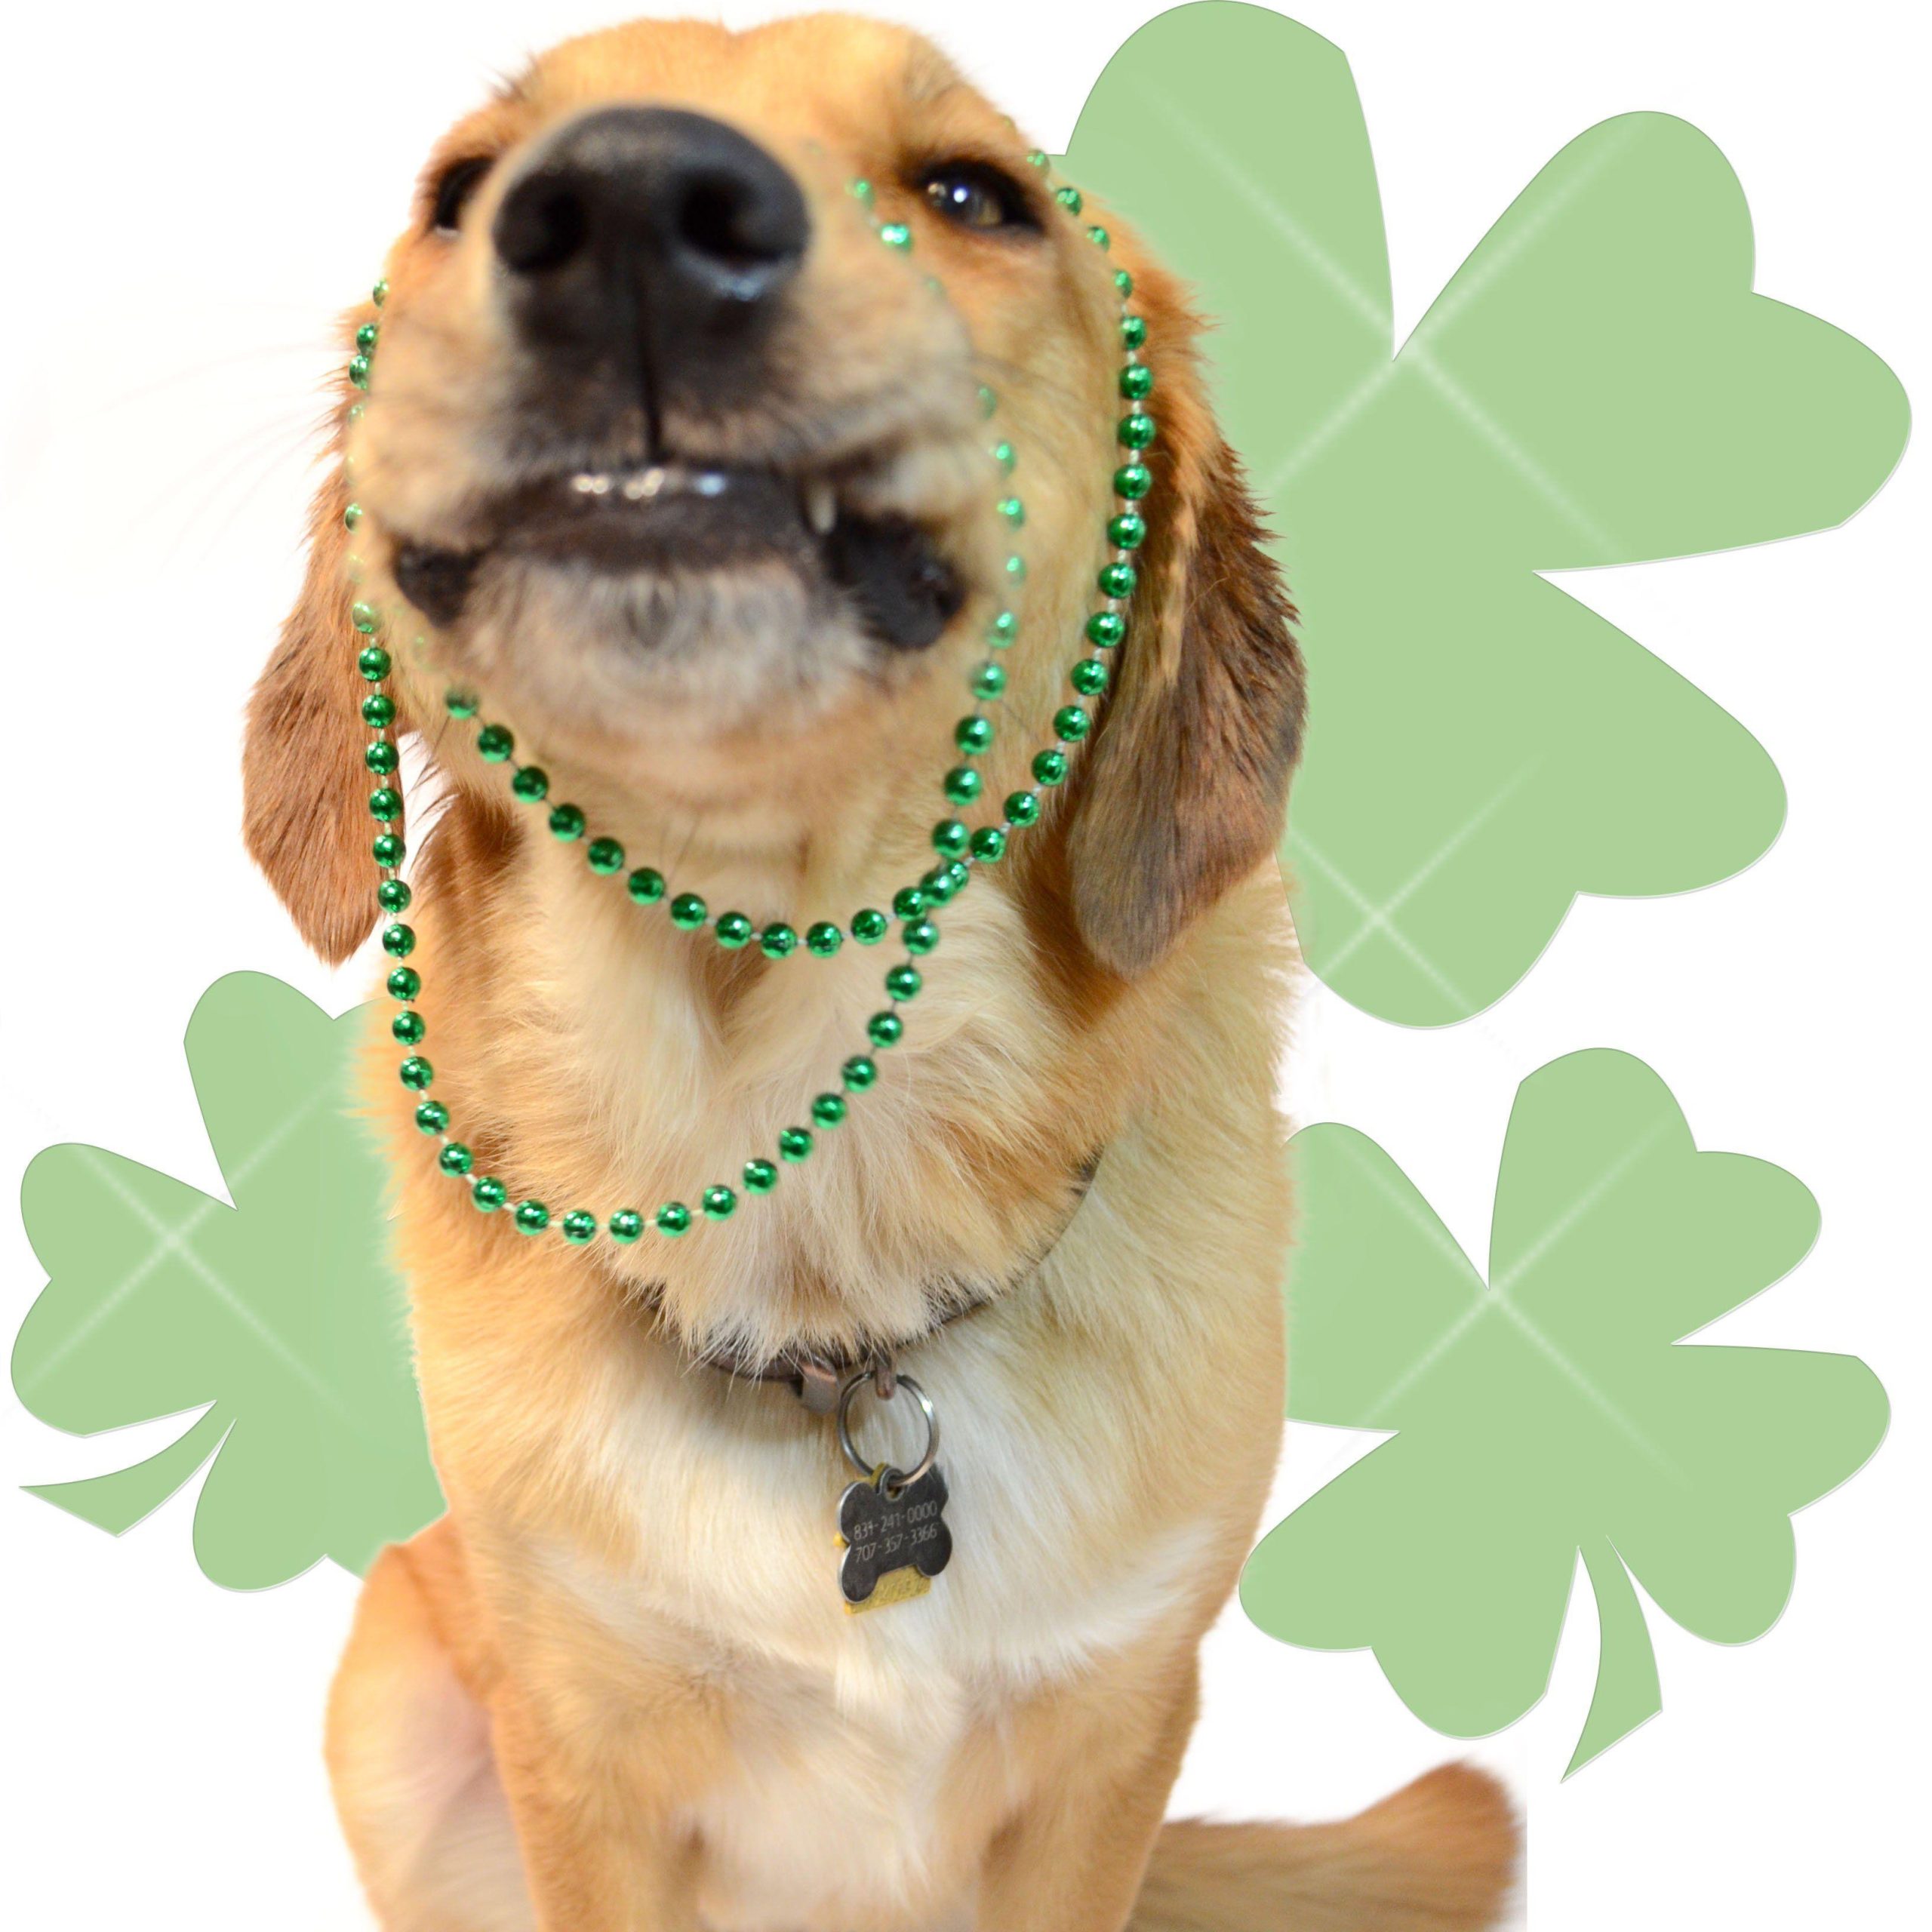 St. Patrick's Day Dogs Wallpaper Download, St. Patrick's Day Dogs, Anime